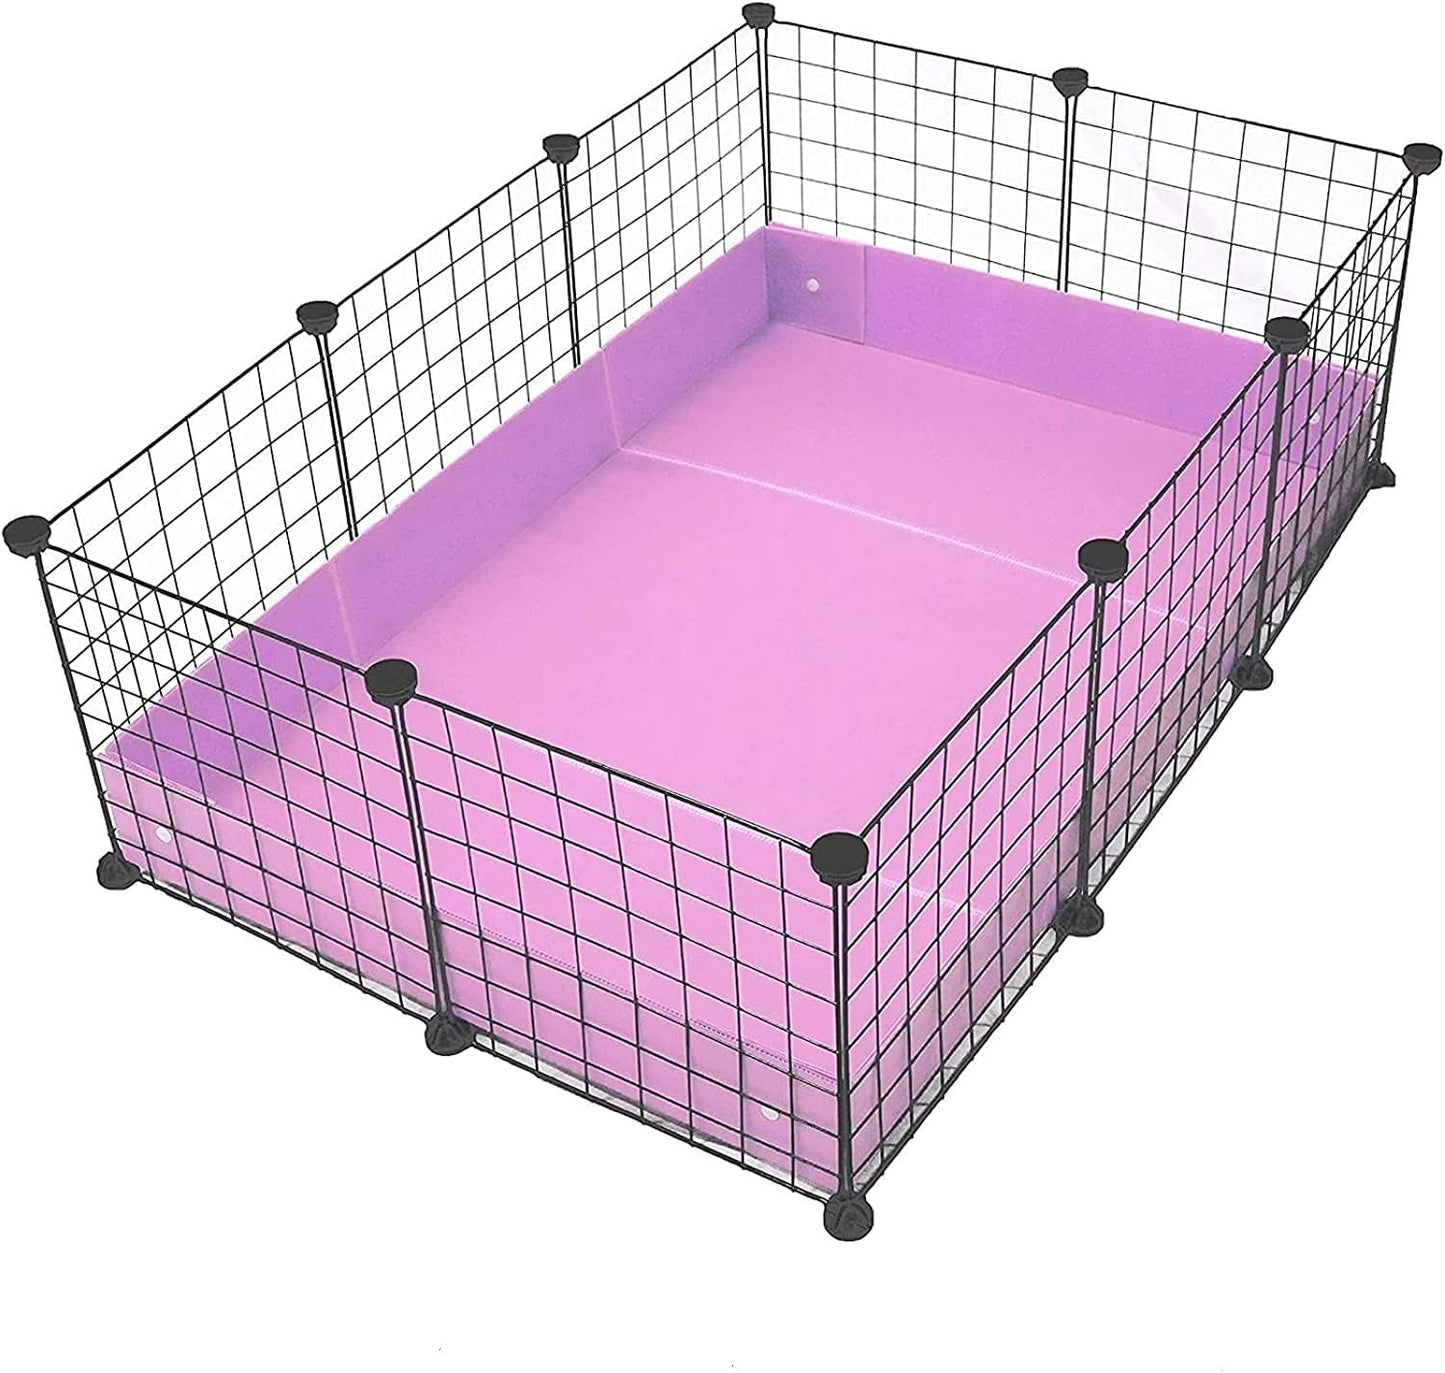 Midlee Guinea Pig Panel Cage with Purple Liner - 10 pc